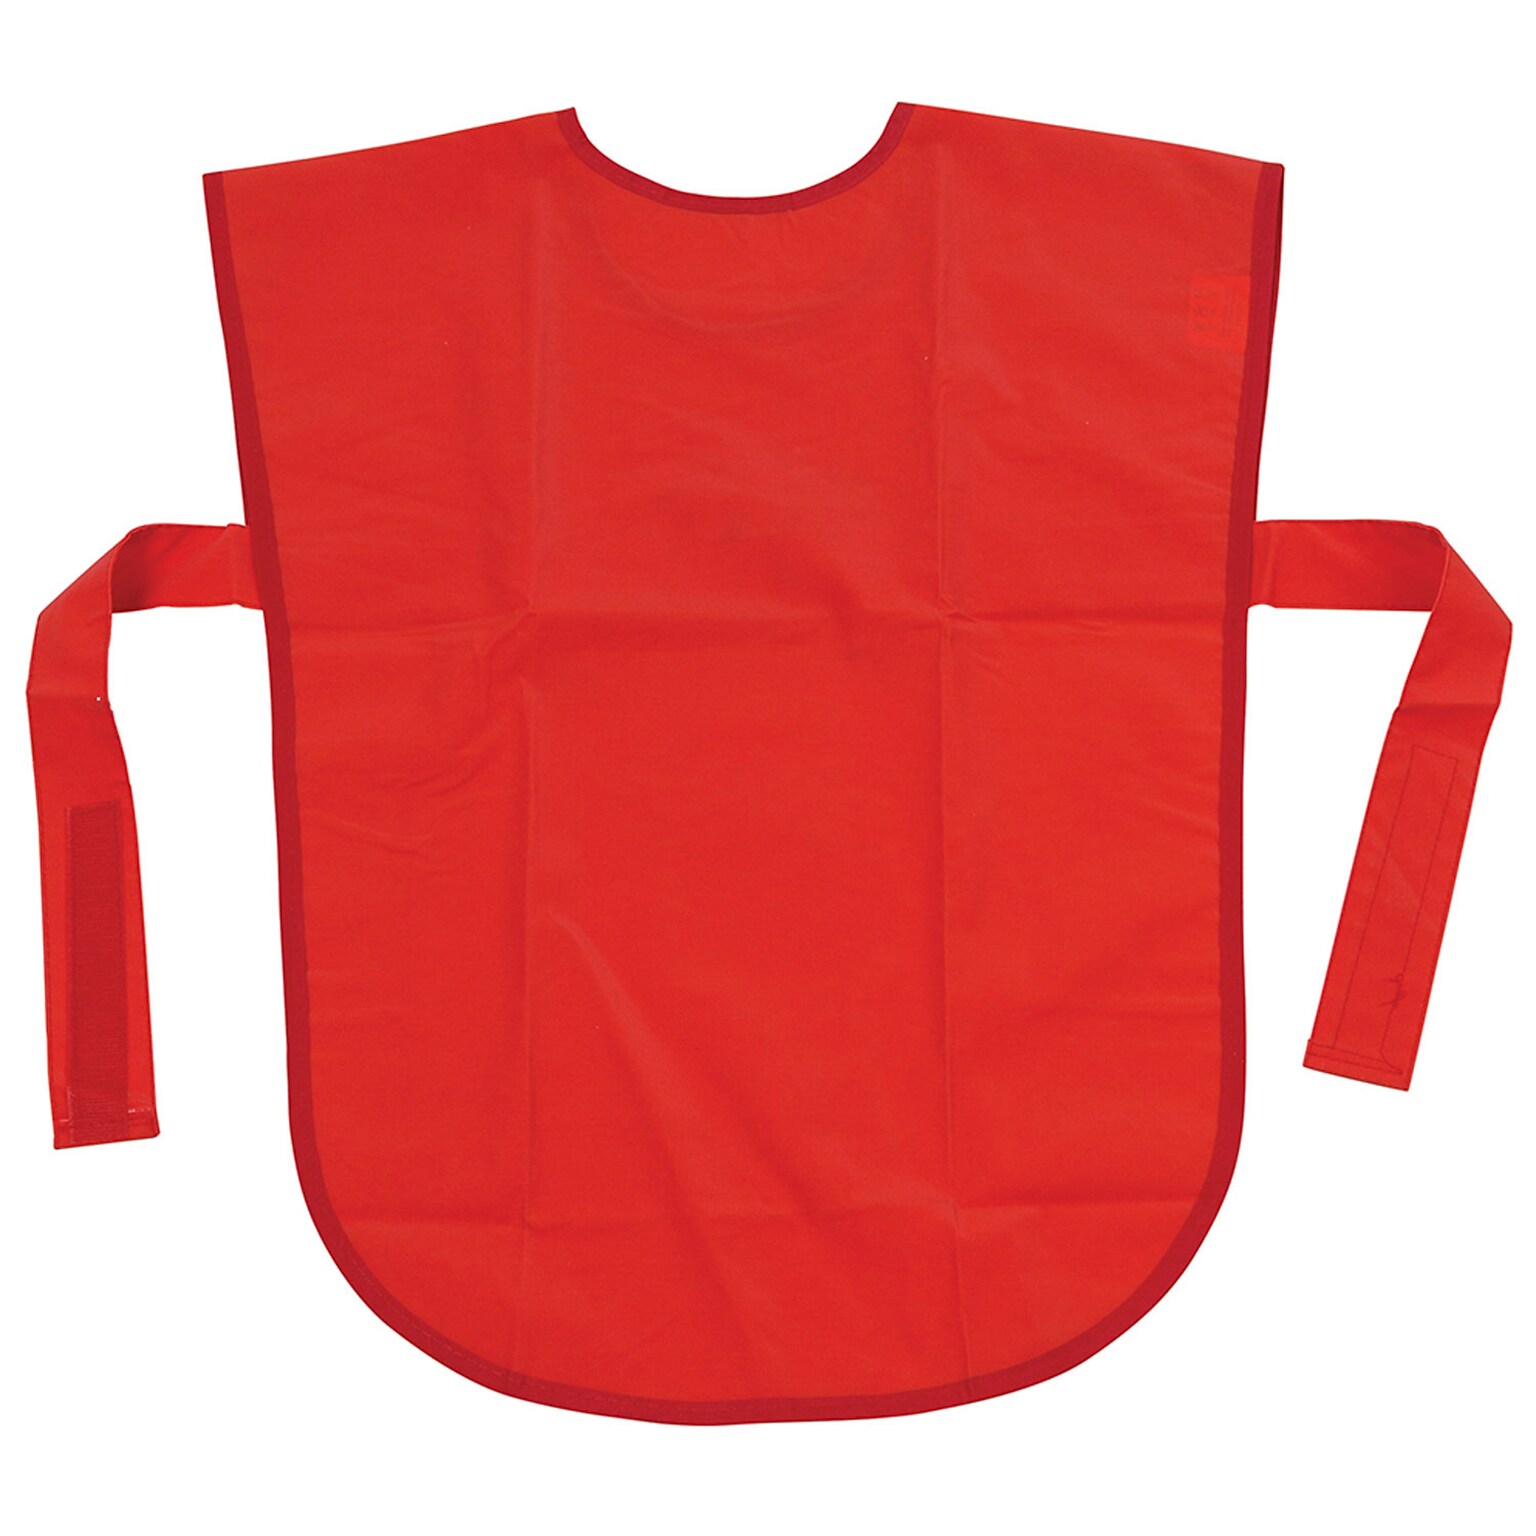 Pacon Art Smock Ages 4-10, 3 Counts of Smocks Per Order (PACAC5235)